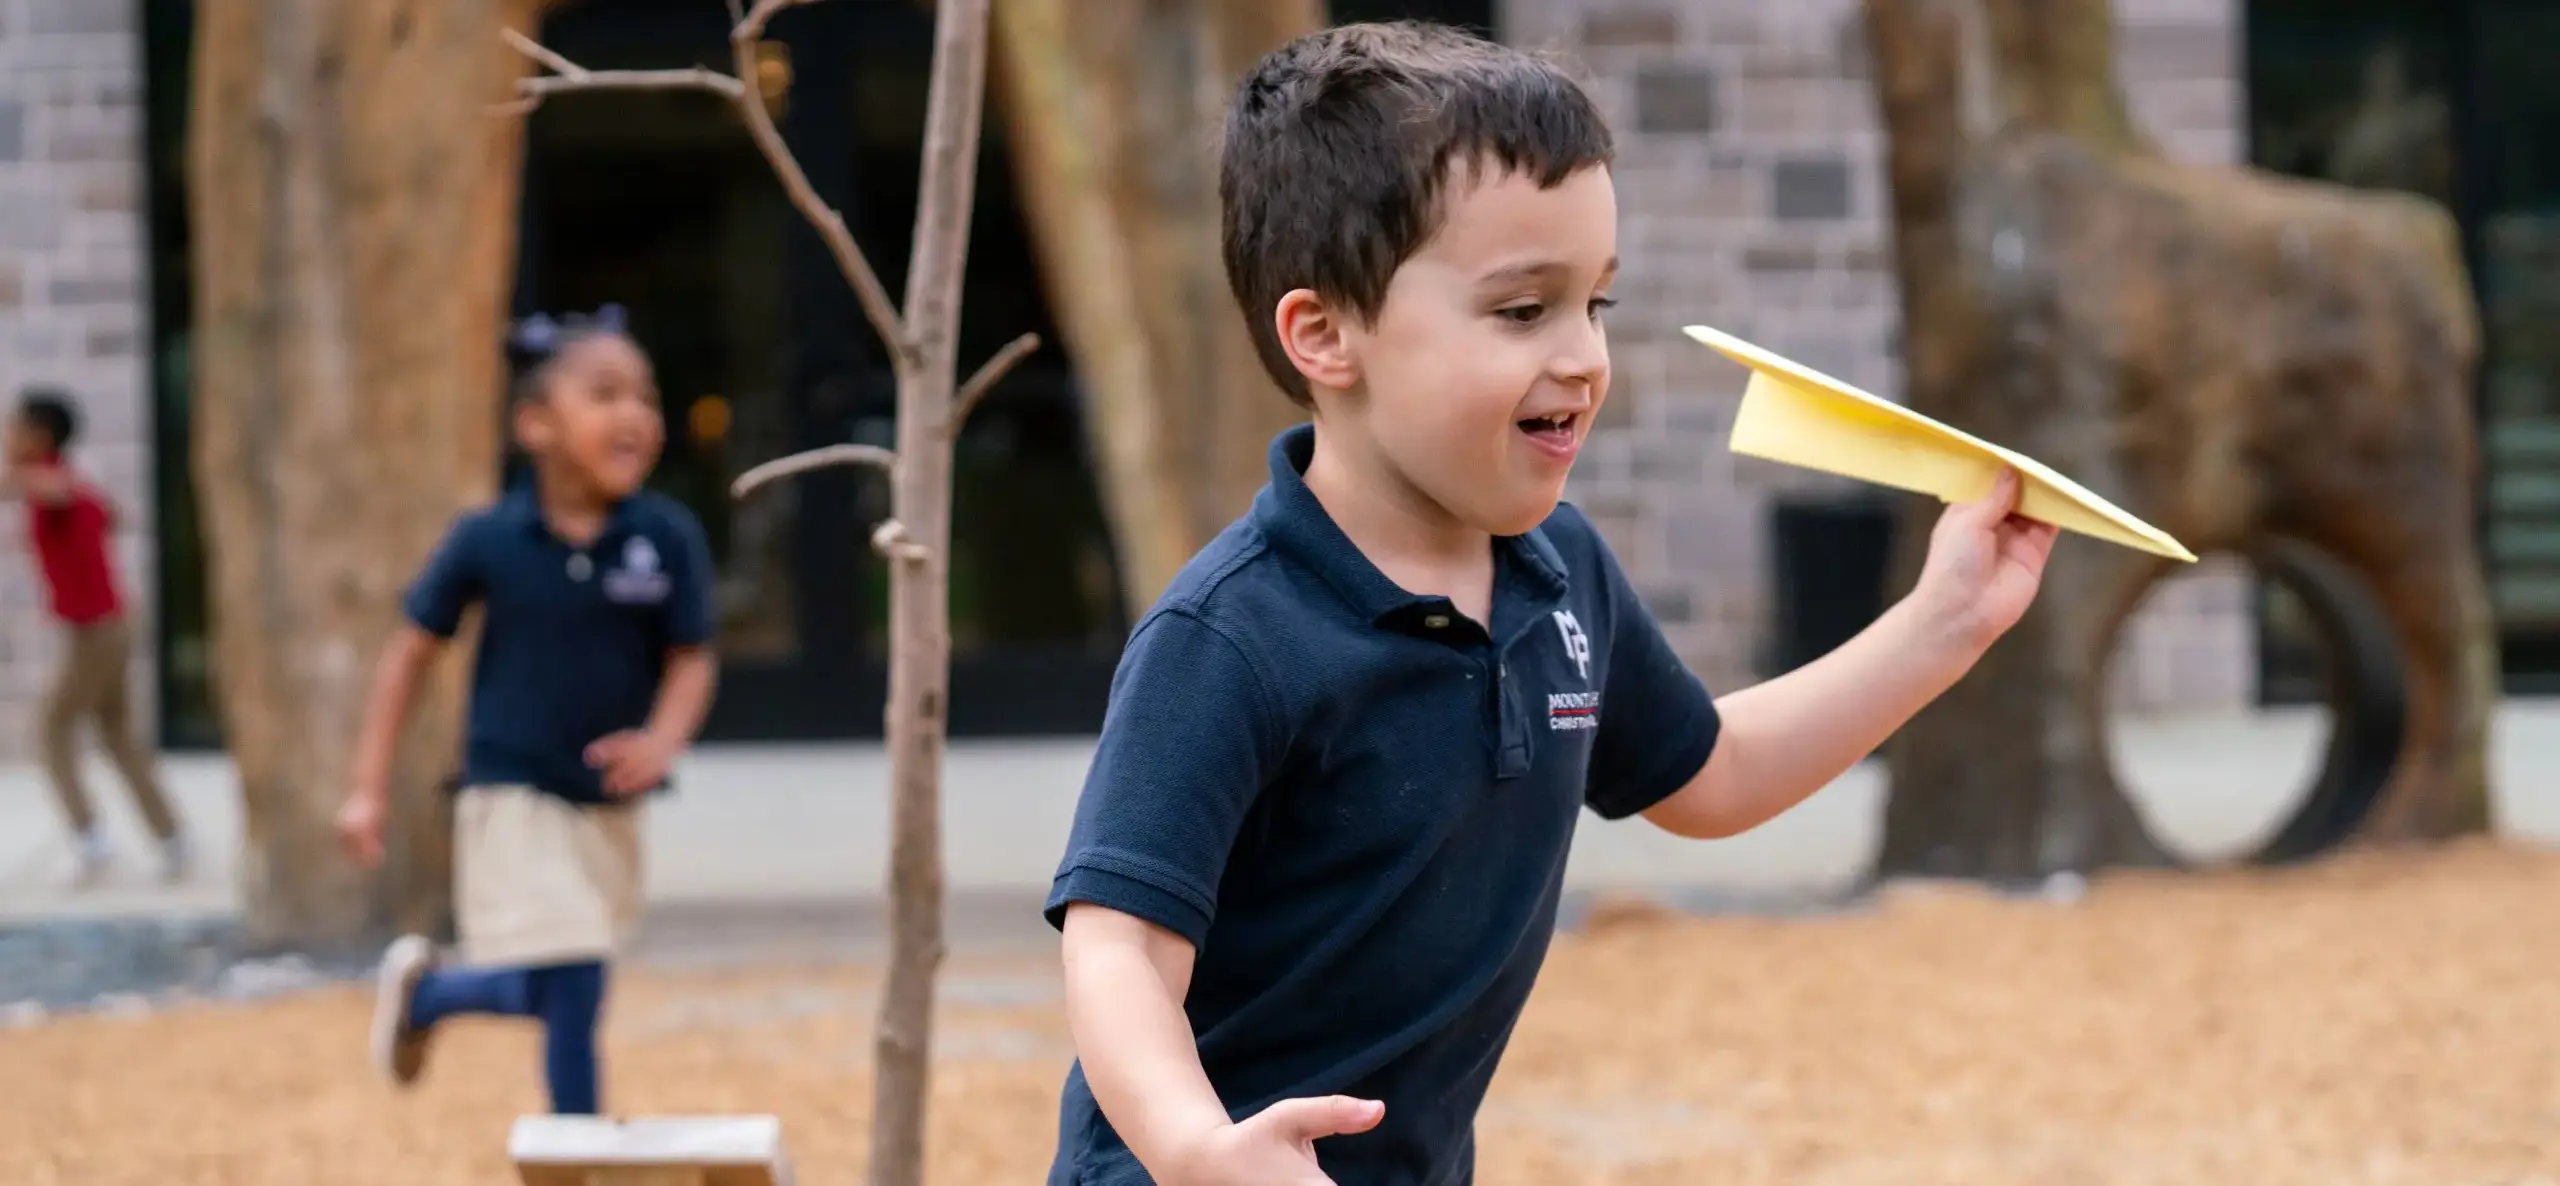 boy runs holding a paper airplane at the playground